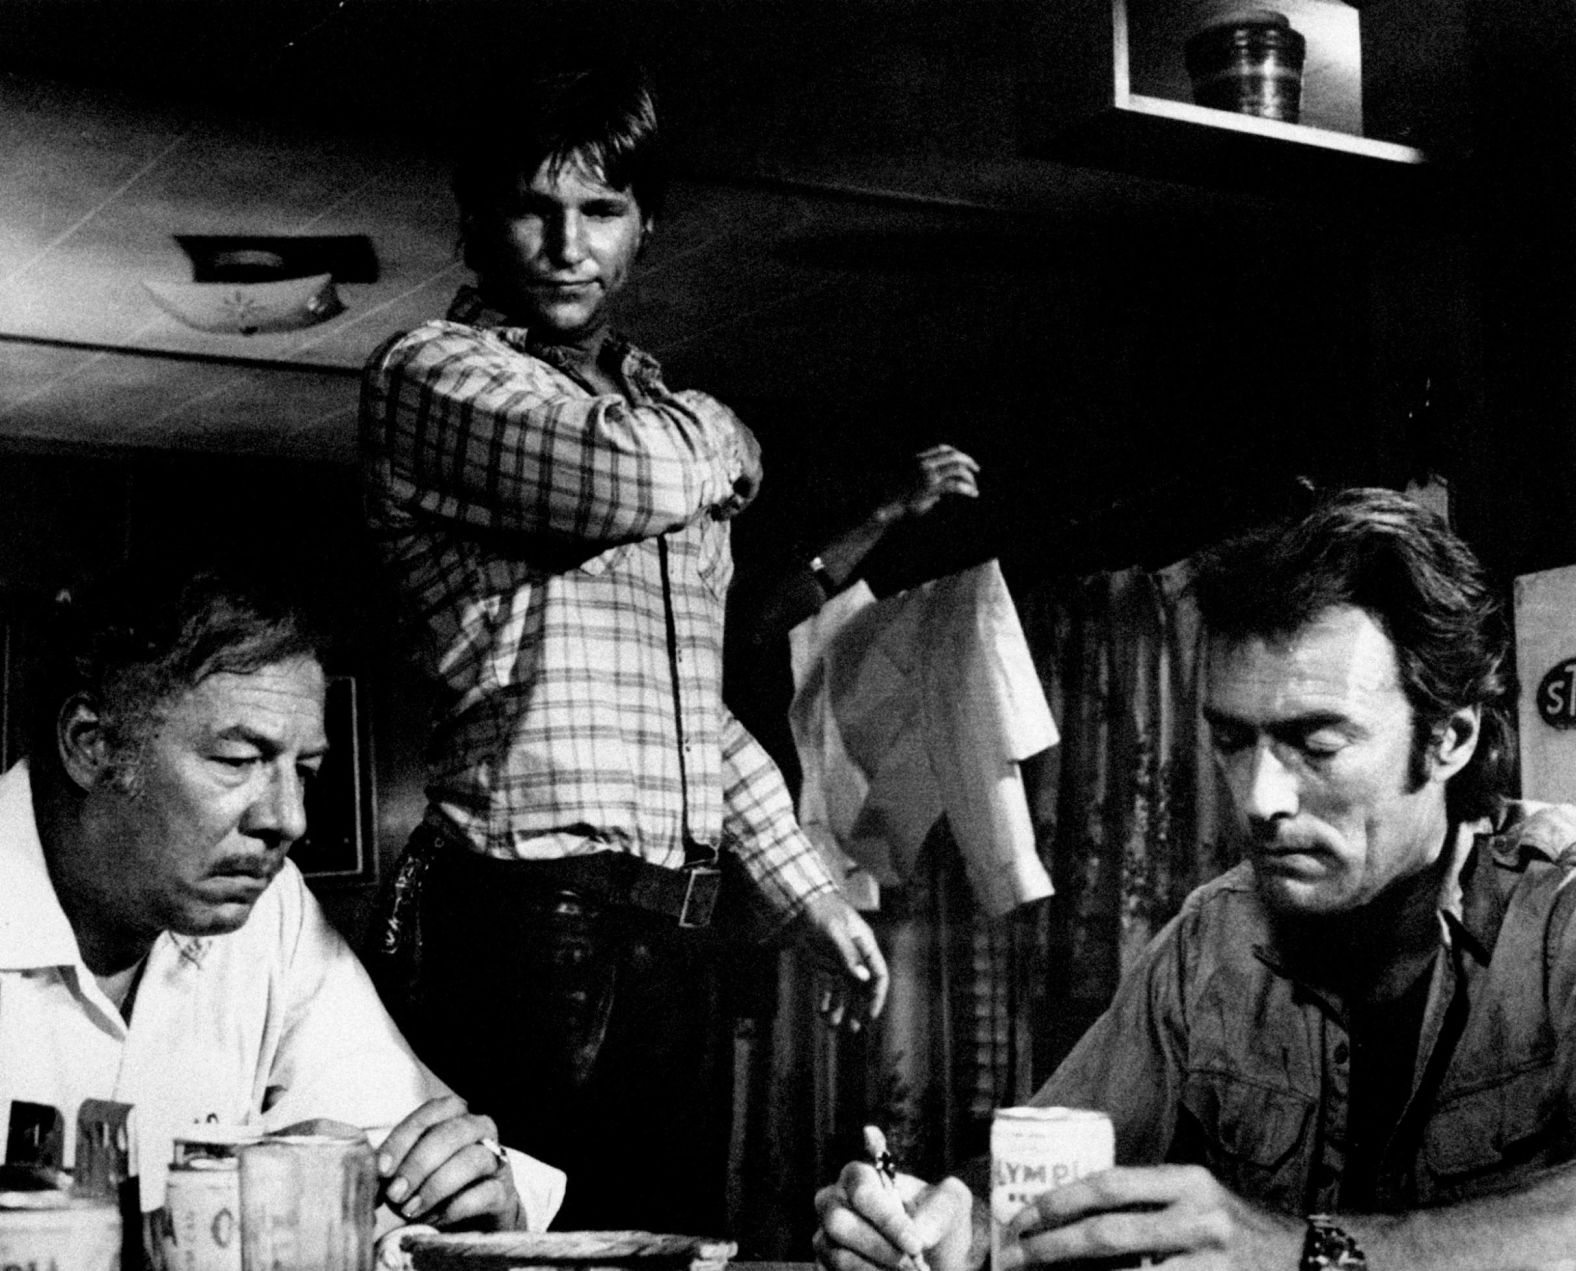 Bridges, center, looks over George Kennedy, left, and Clint Eastwood during the 1974 film "Thunderbolt and Lightfoot." Bridges' performance in the movie earned him another Oscar nomination.